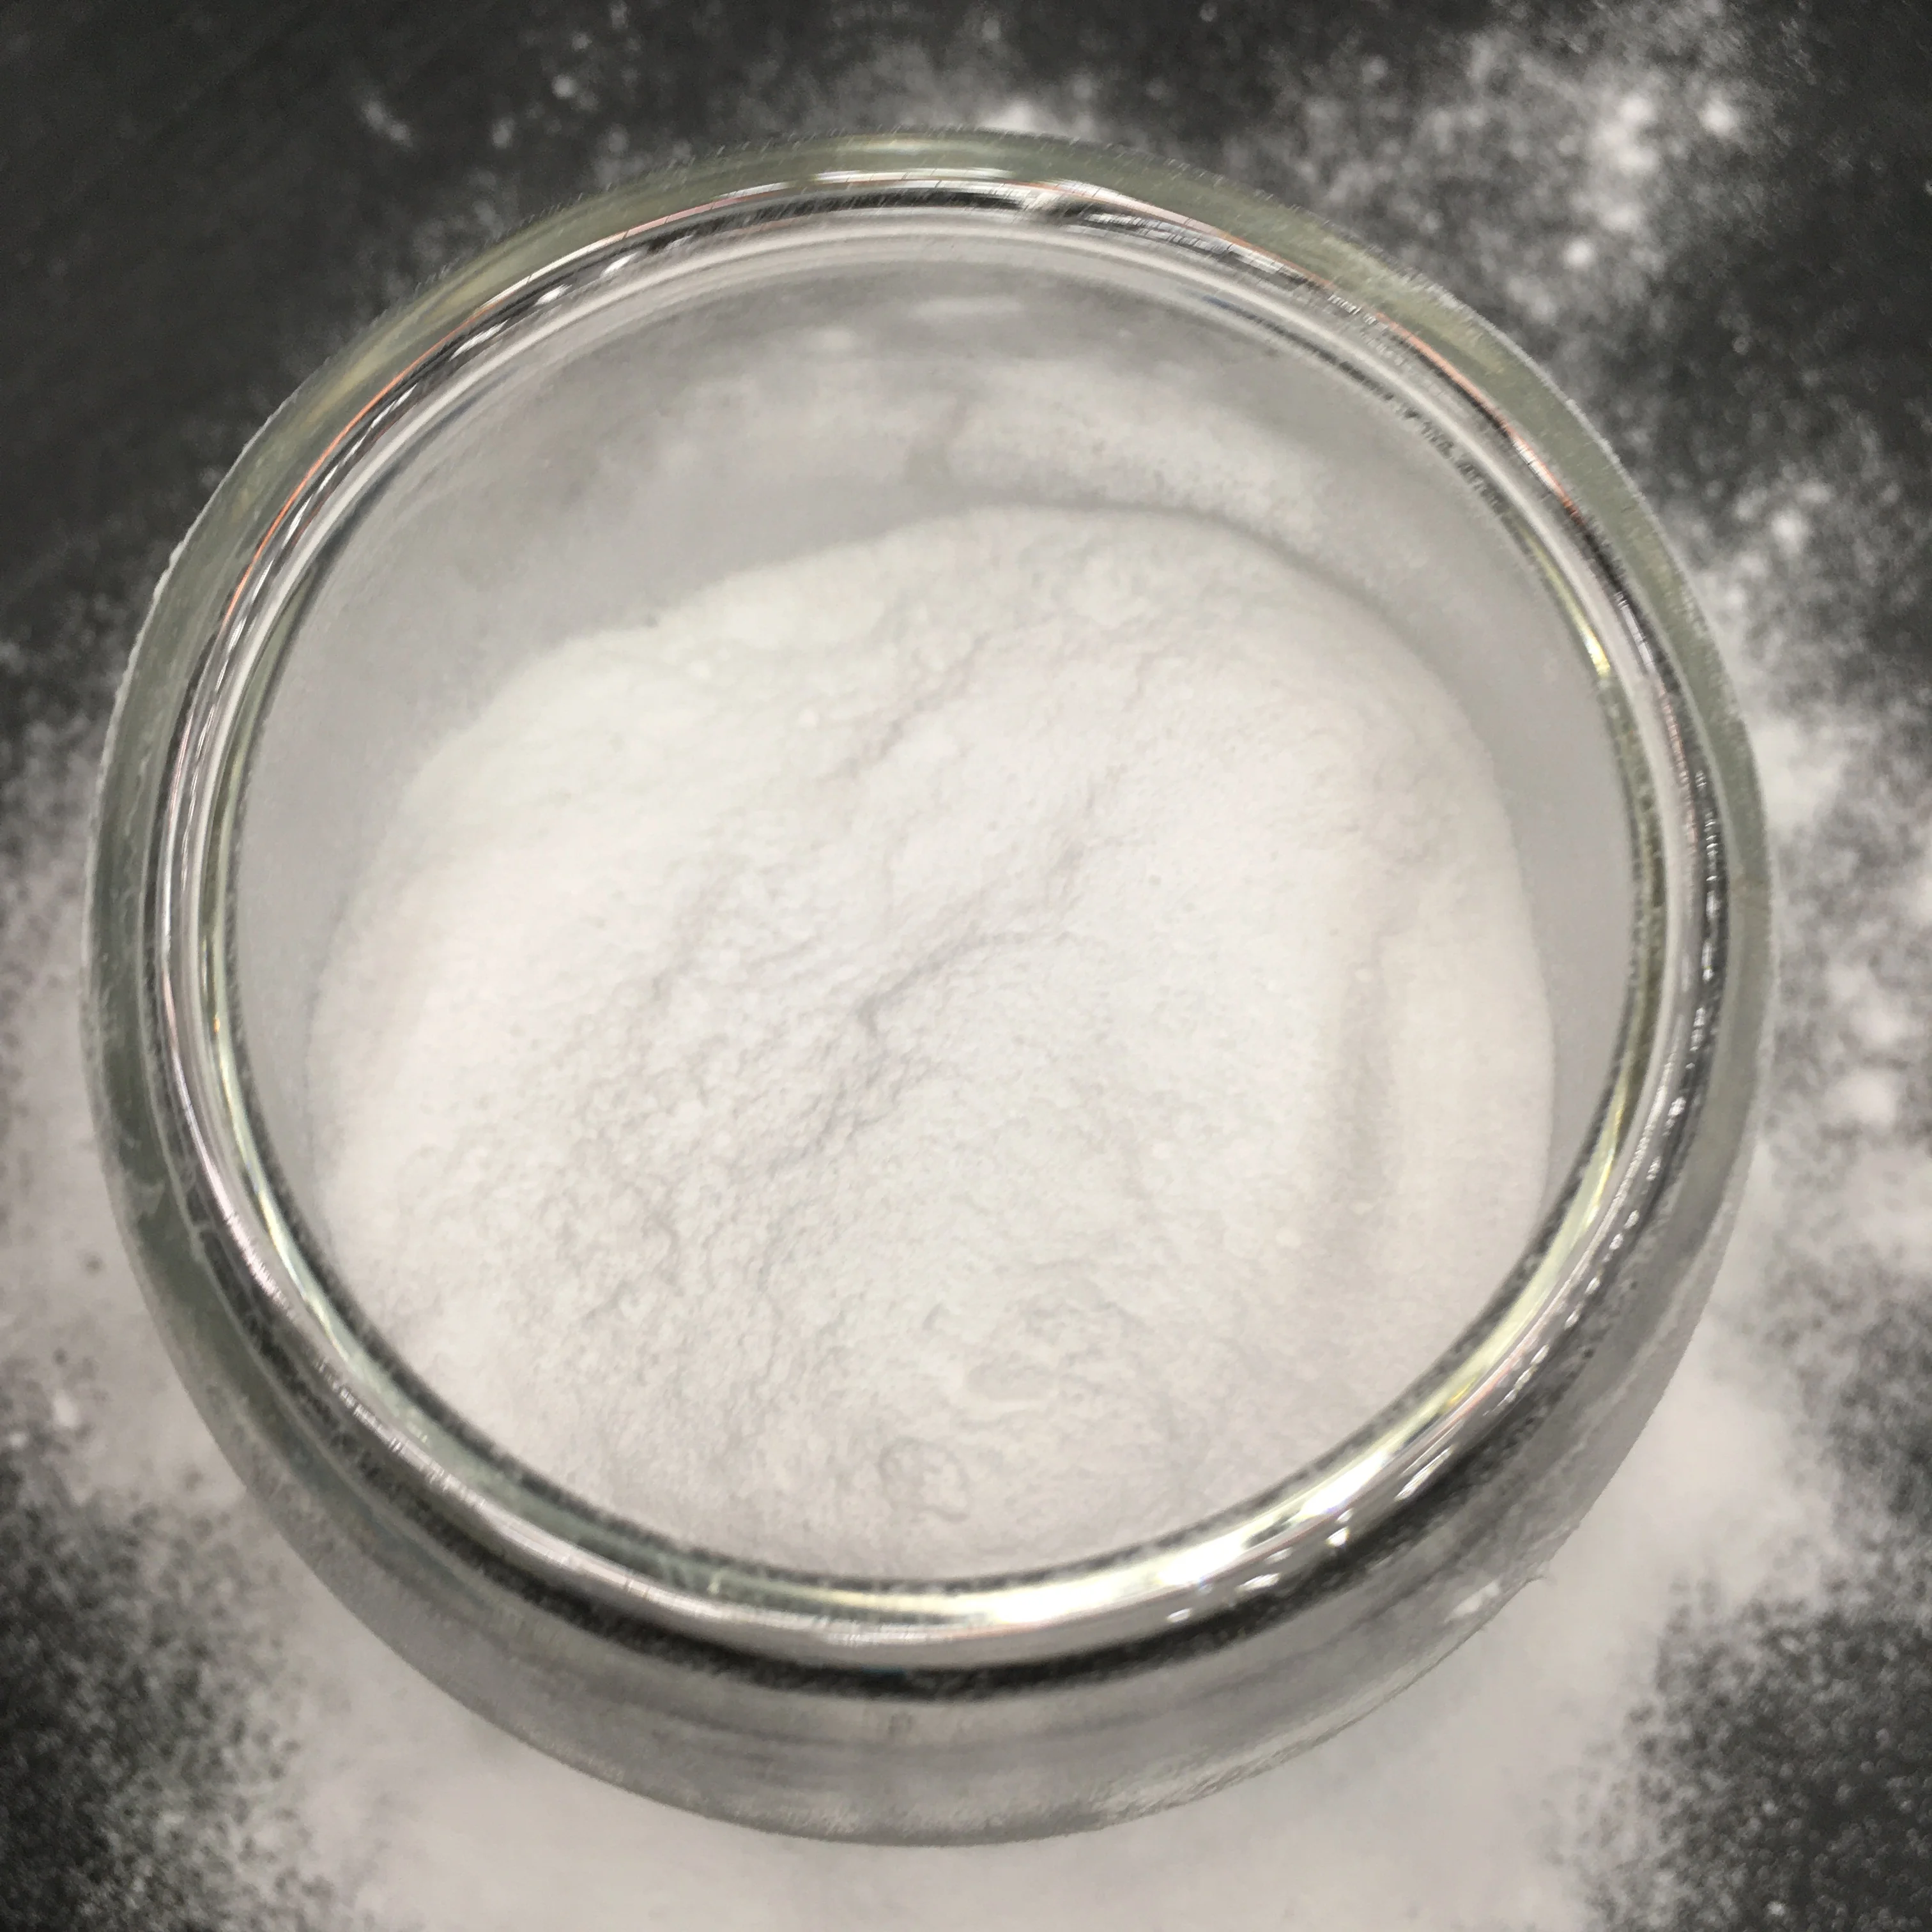 Industrial grade monohydrate magnesium sulfate/sulphate with best price